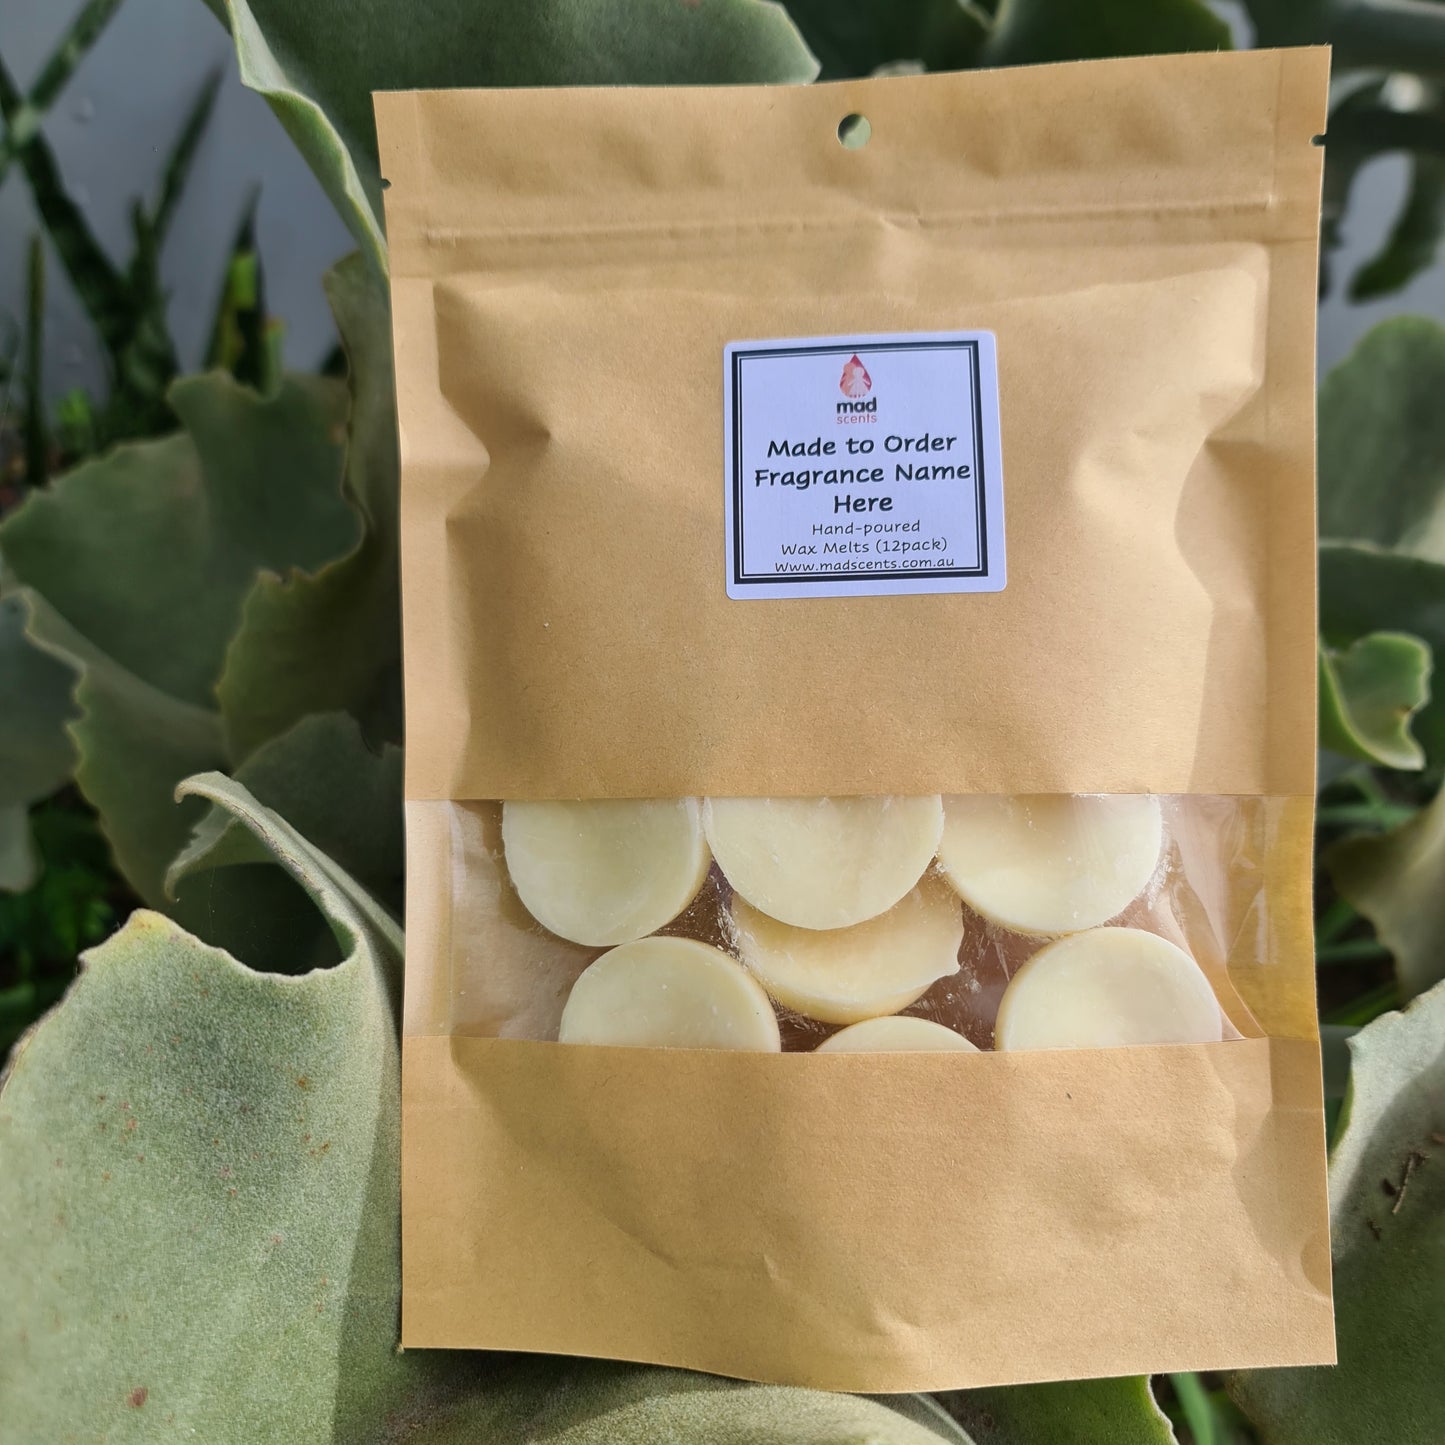 Standard Soy Wax Melt - 12pack Made to Order